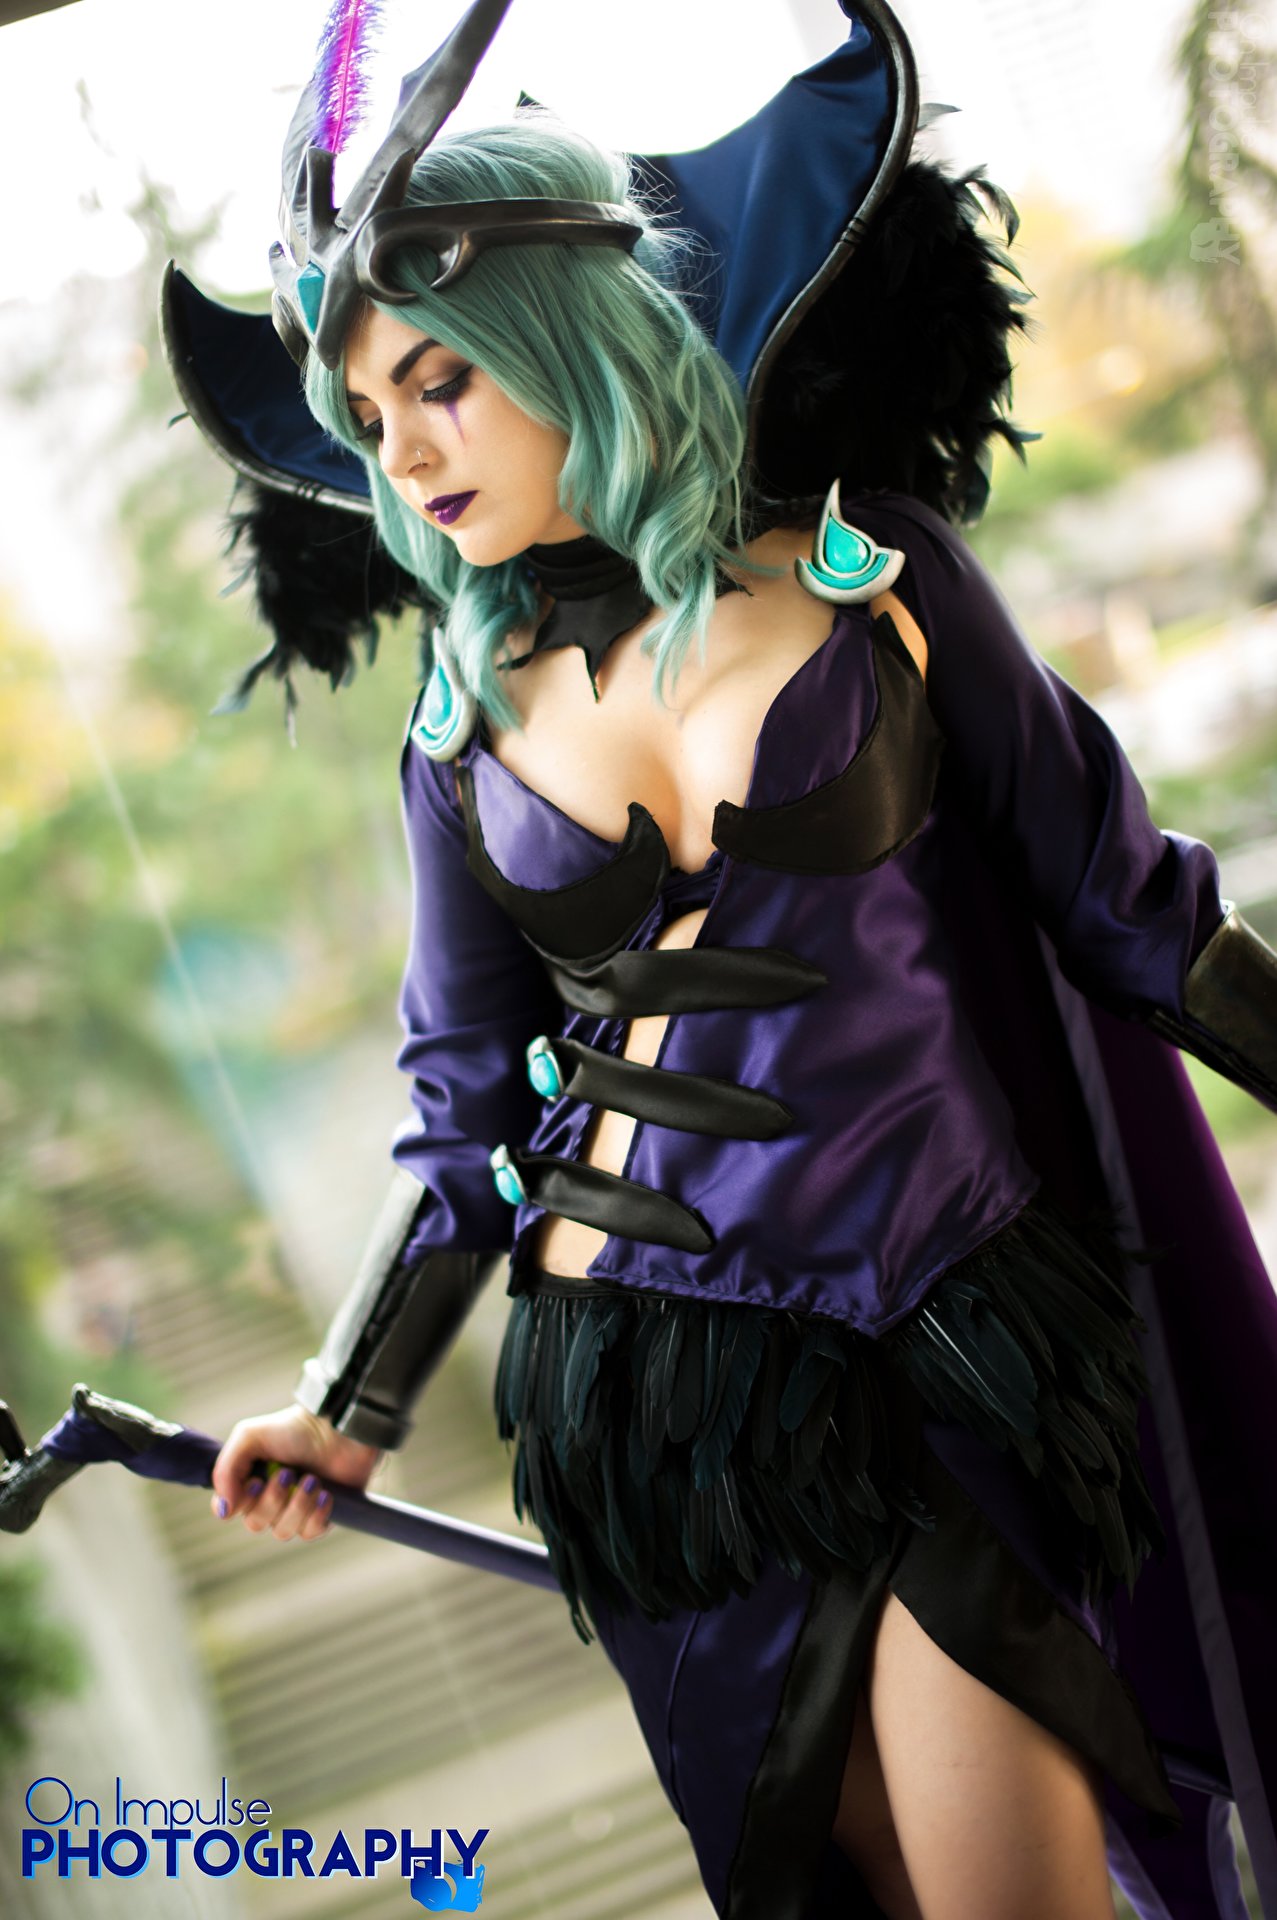 Cospix.net photo featuring On Impulse Photography and Bloodraven Cosplay